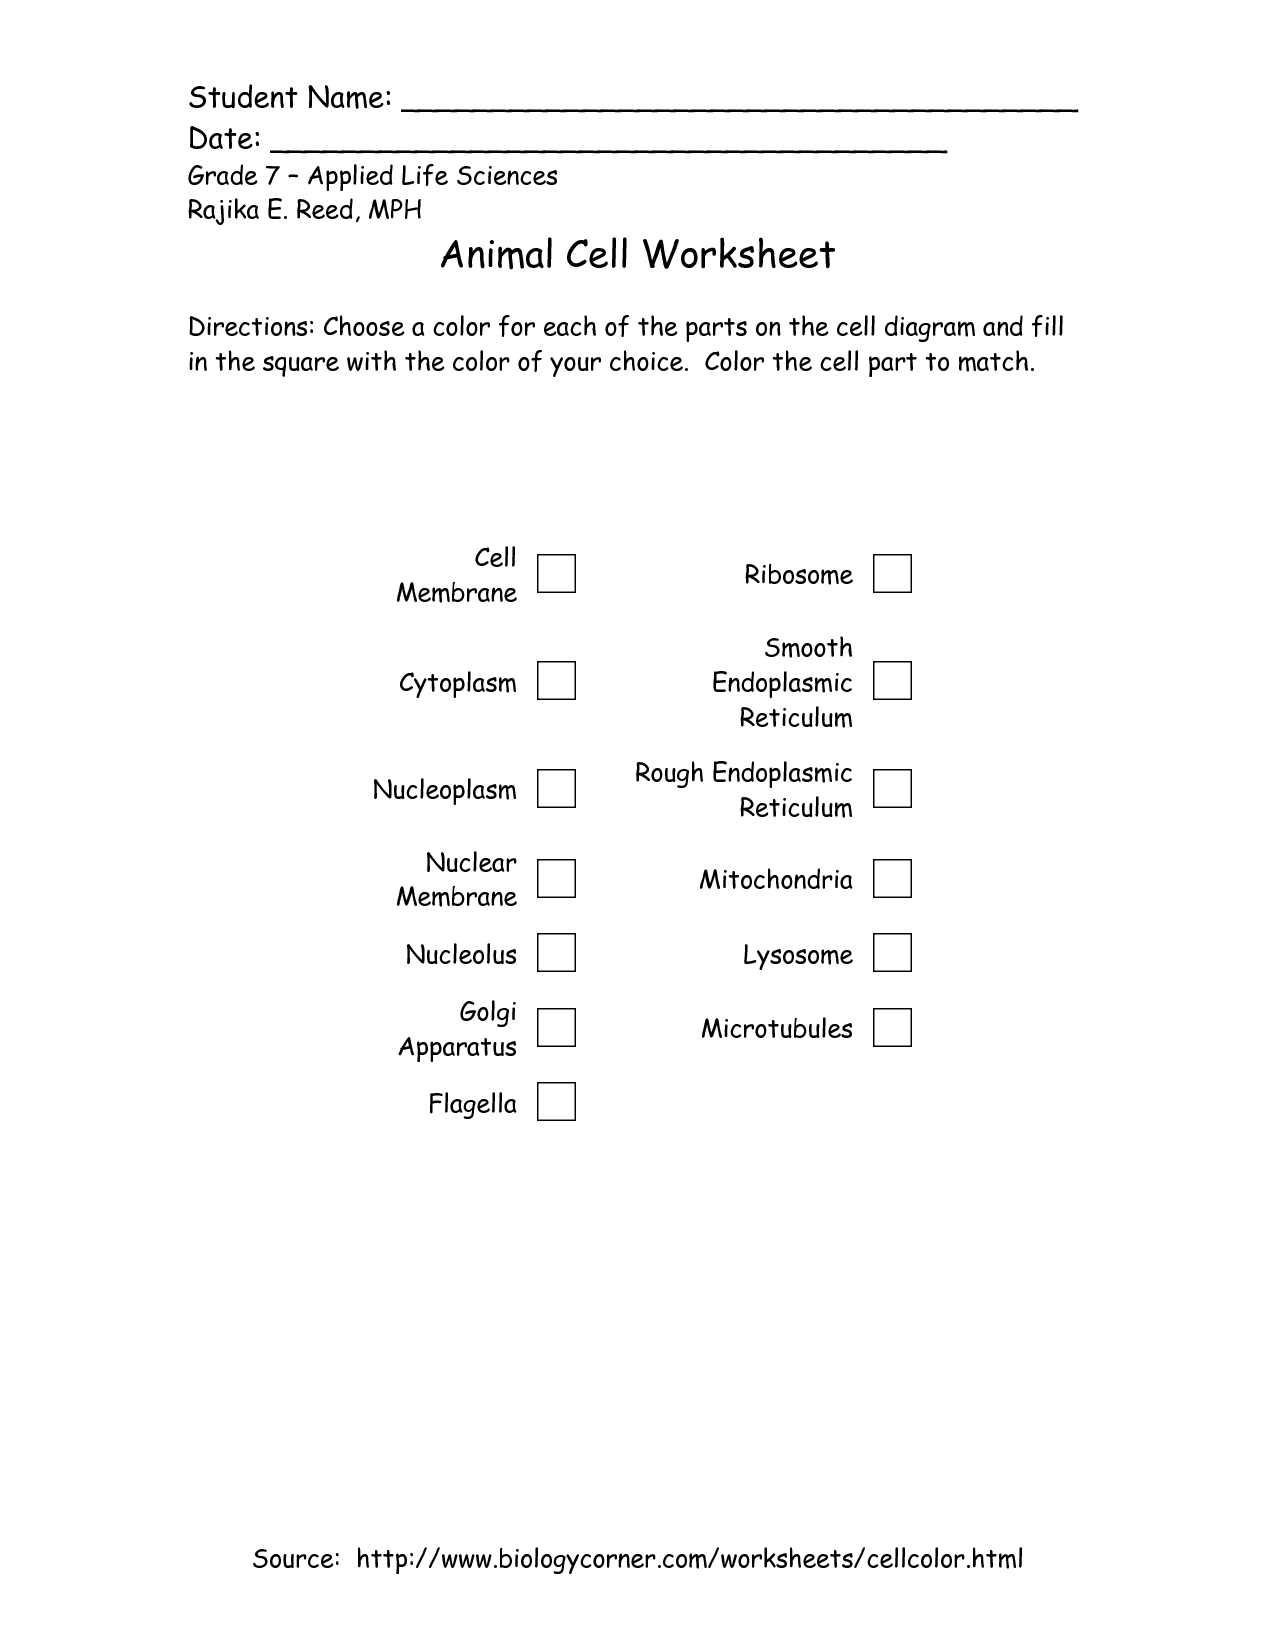 Plant and Animal Cell Worksheets 7th Grade Image